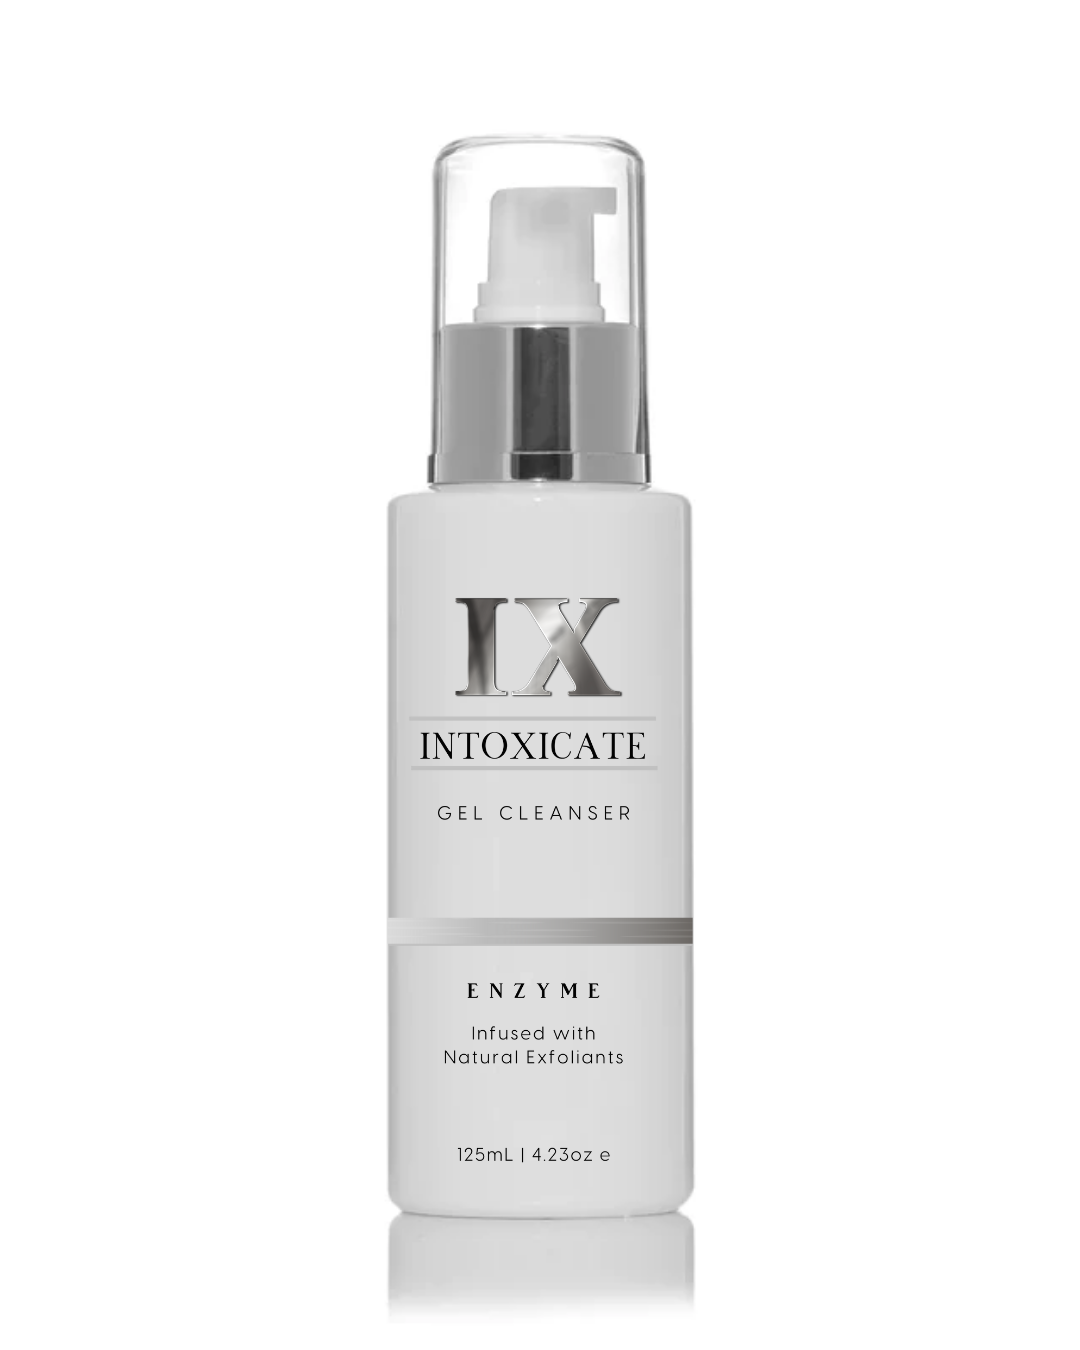 Intoxicate's Enzyme Gel Cleanser